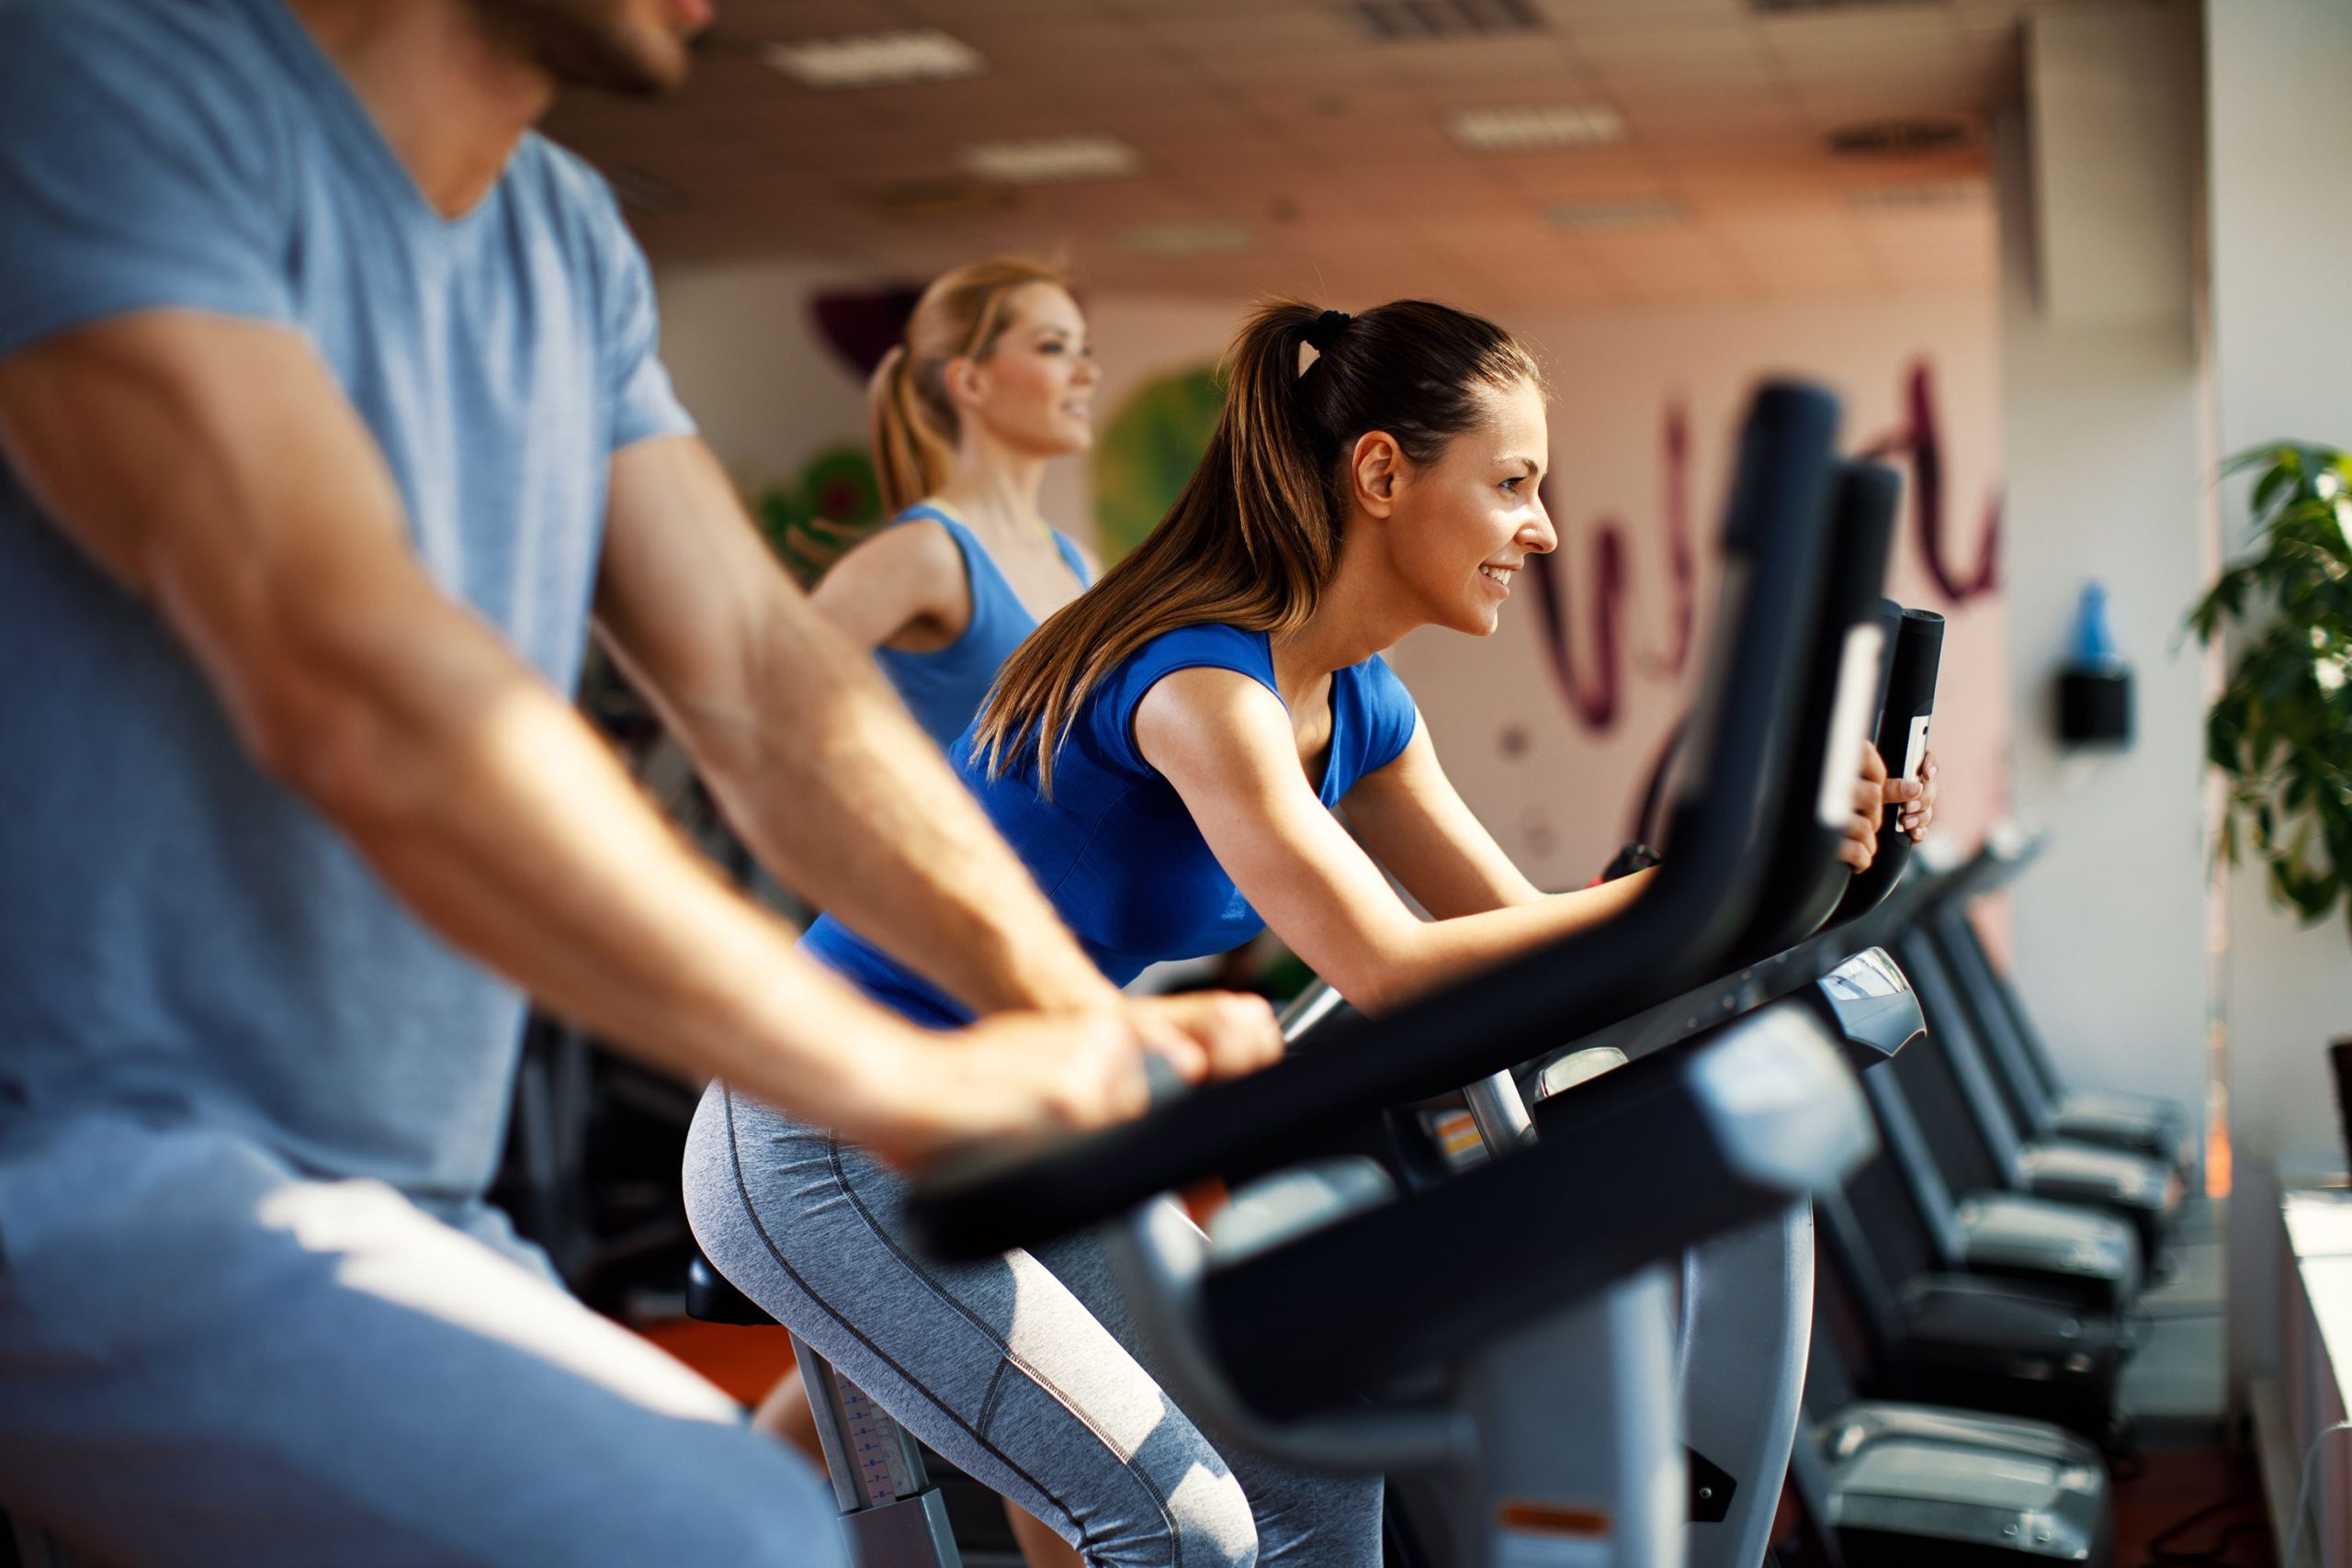 Women Reap Extra Health Gains from Regular Exercise, Study Finds